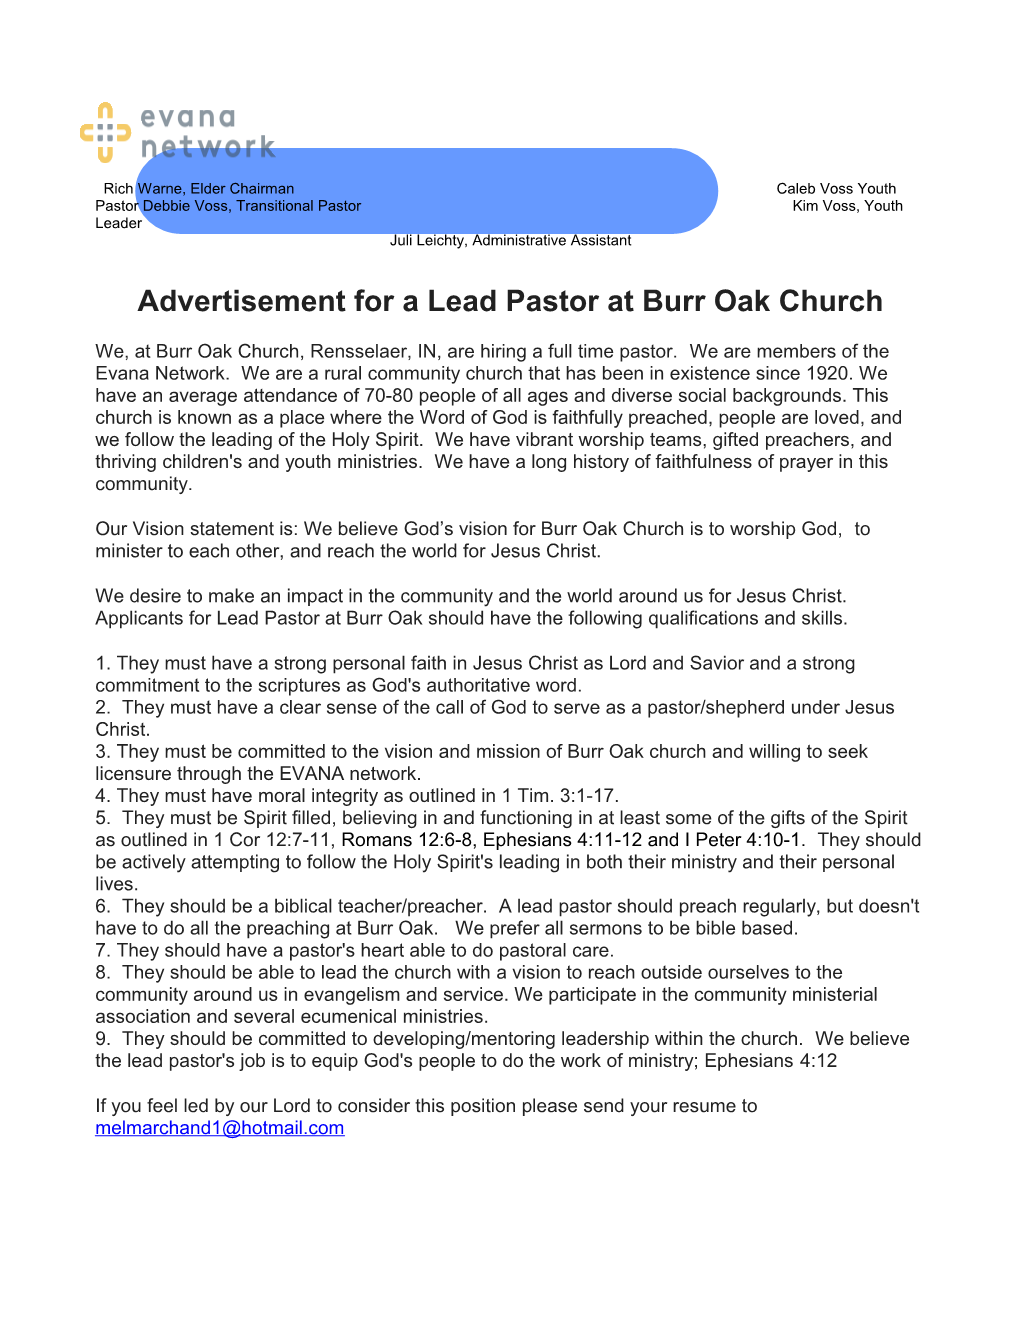 Advertisement for a Lead Pastor at Burr Oak Church